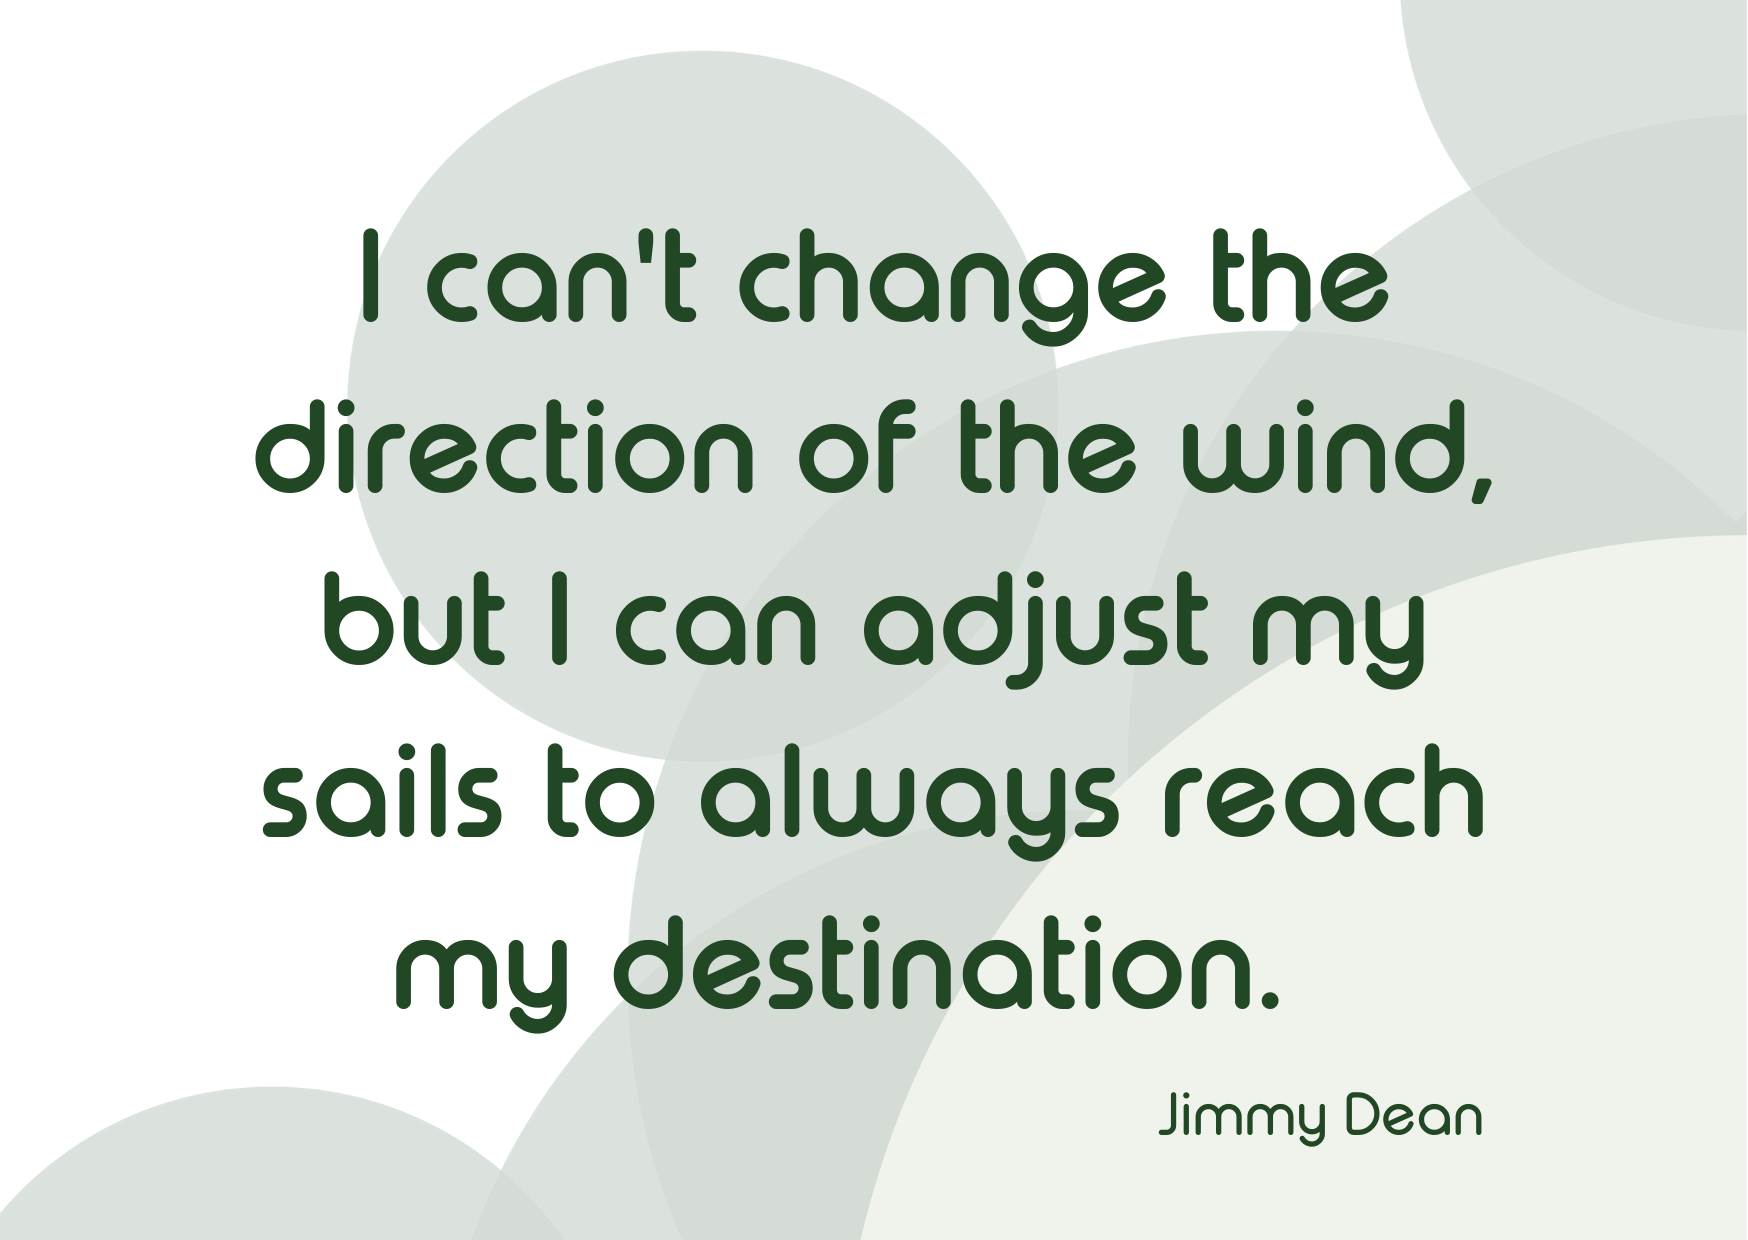 When we are faced with difficult times, when we can't change the situation, time or challenge faced it is important to look within, can we change the way we think about what we are facing? Will this adjustment make it easier to sail through? 